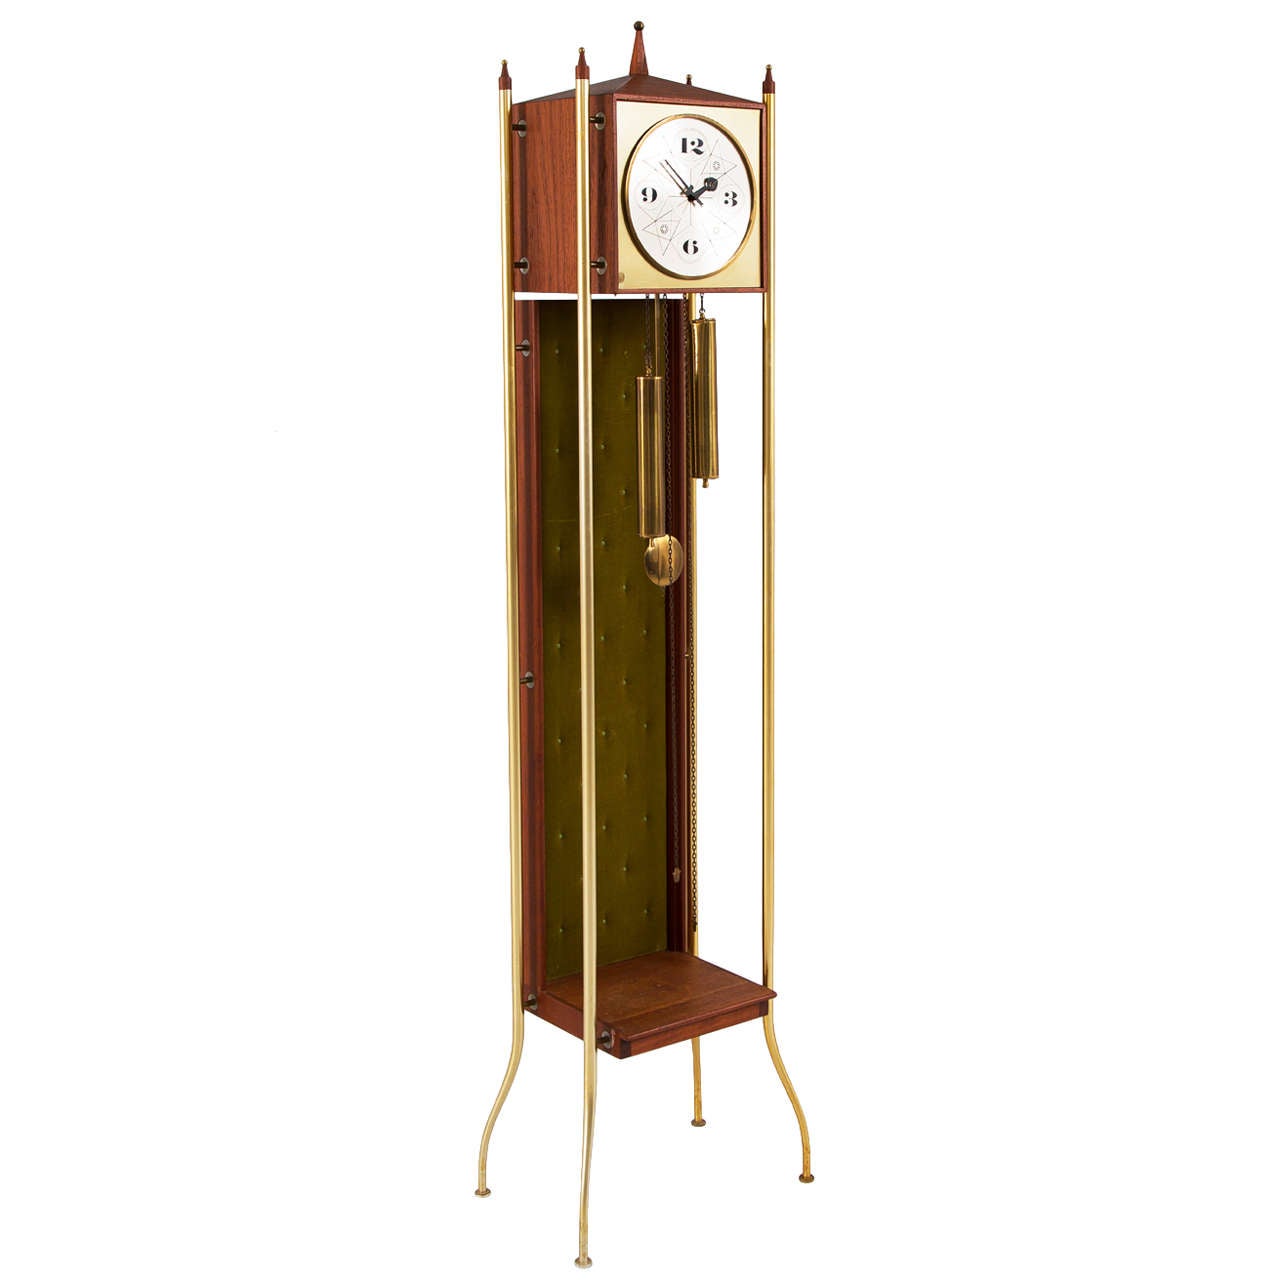 "Swag-Leg" Grandfather Clock by George Nelson